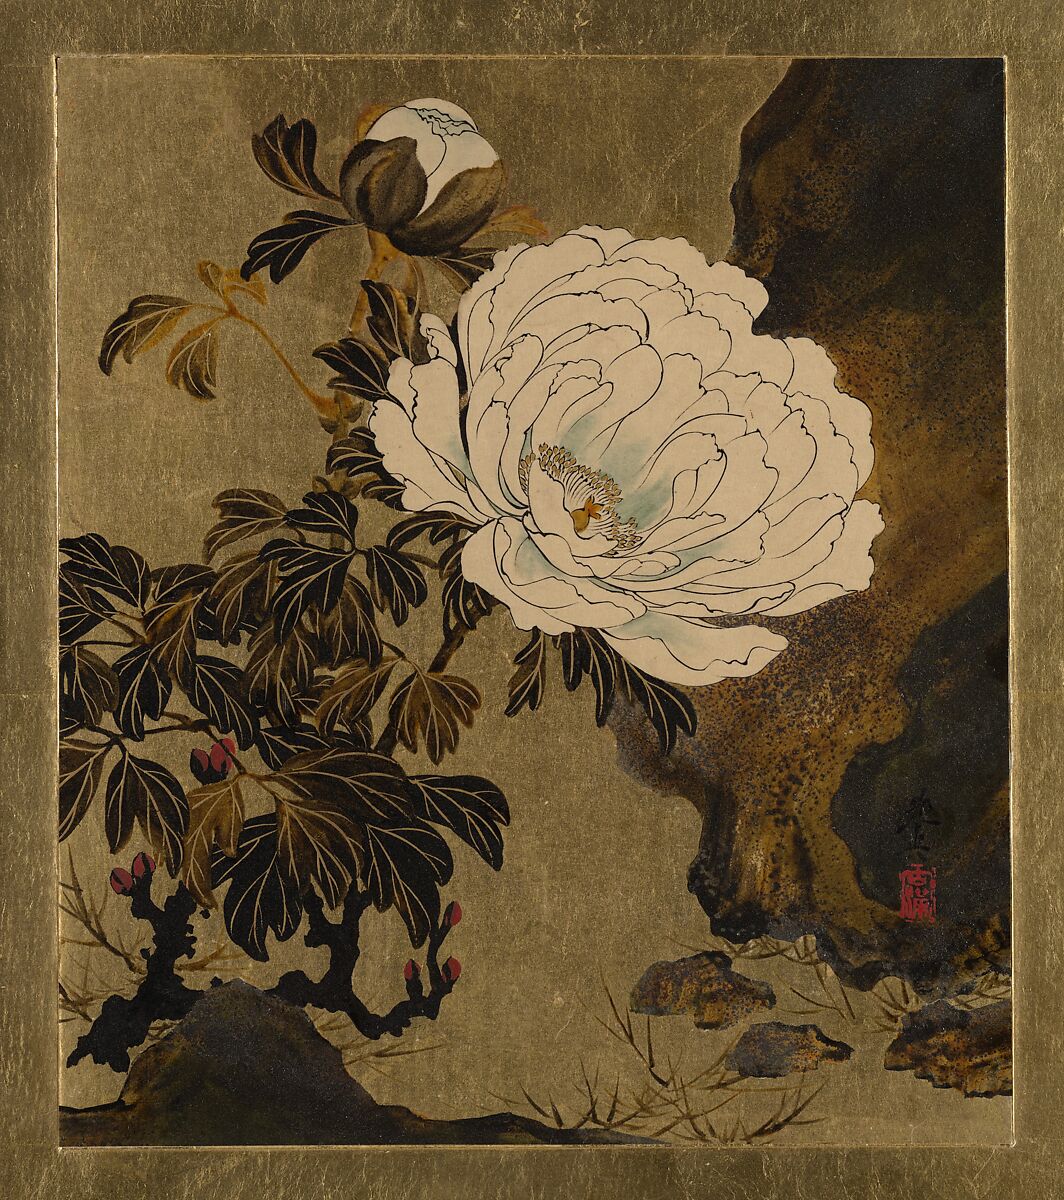 Lacquer Paintings of Various Subjects: Peonies, Shibata Zeshin (Japanese, 1807–1891), Lacquer and gold on paper, Japan 